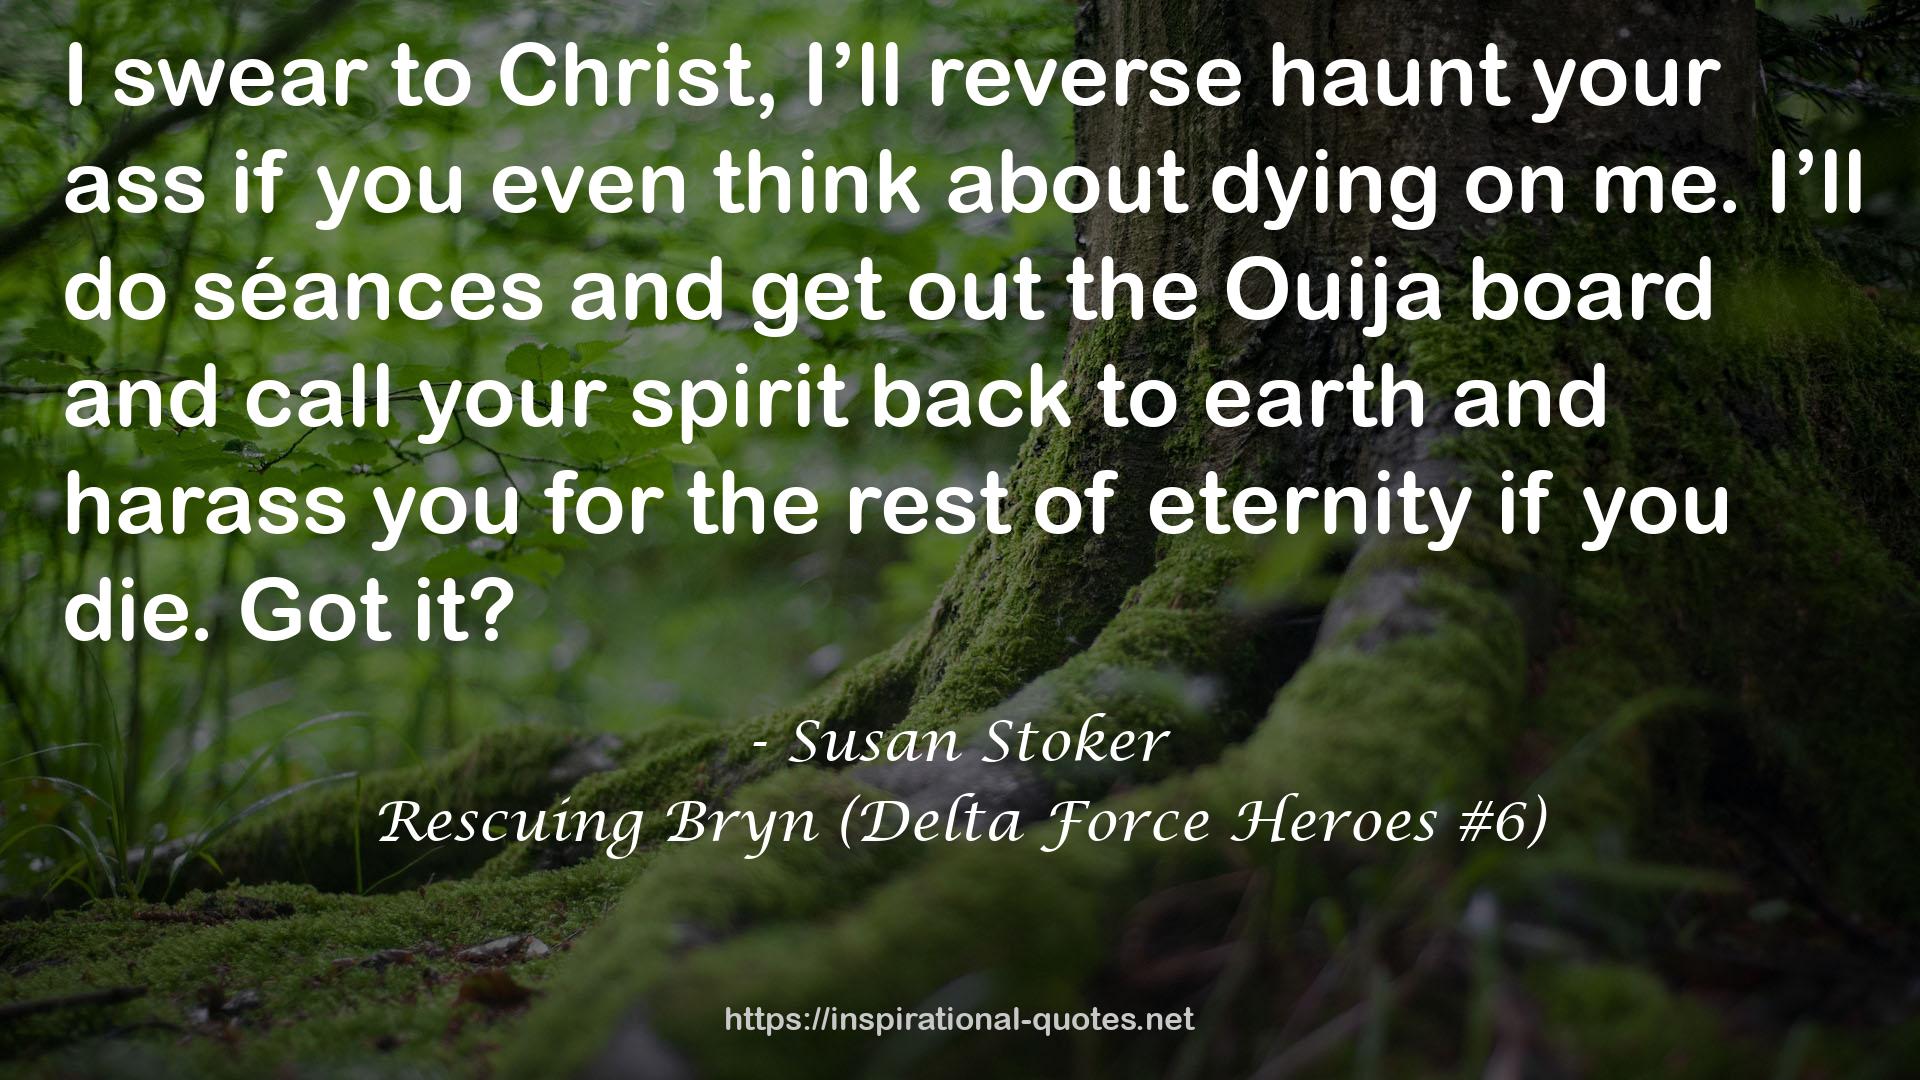 Rescuing Bryn (Delta Force Heroes #6) QUOTES